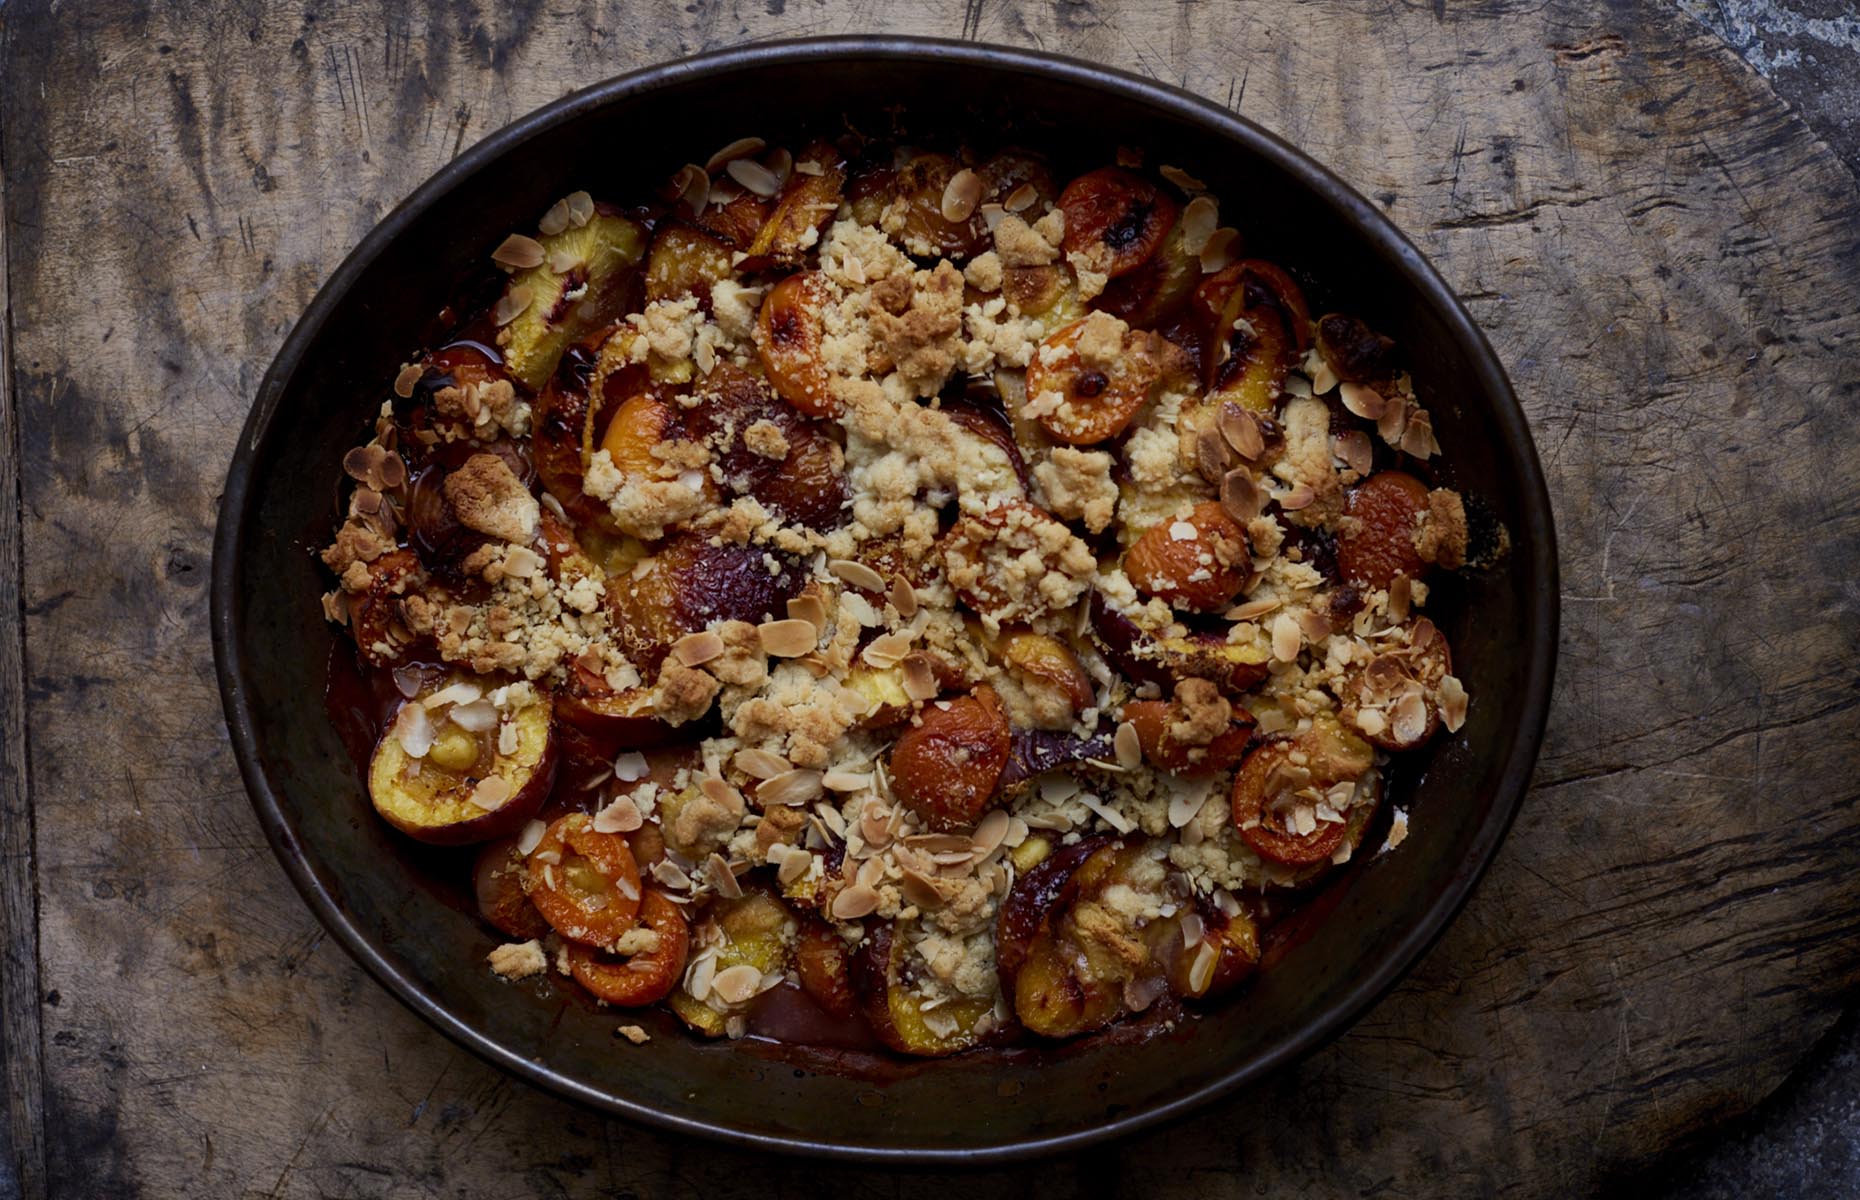 Roast stone fruit with almond and orange flower crumb (Image: From the Oven to the Table/Mitchell Beazley)